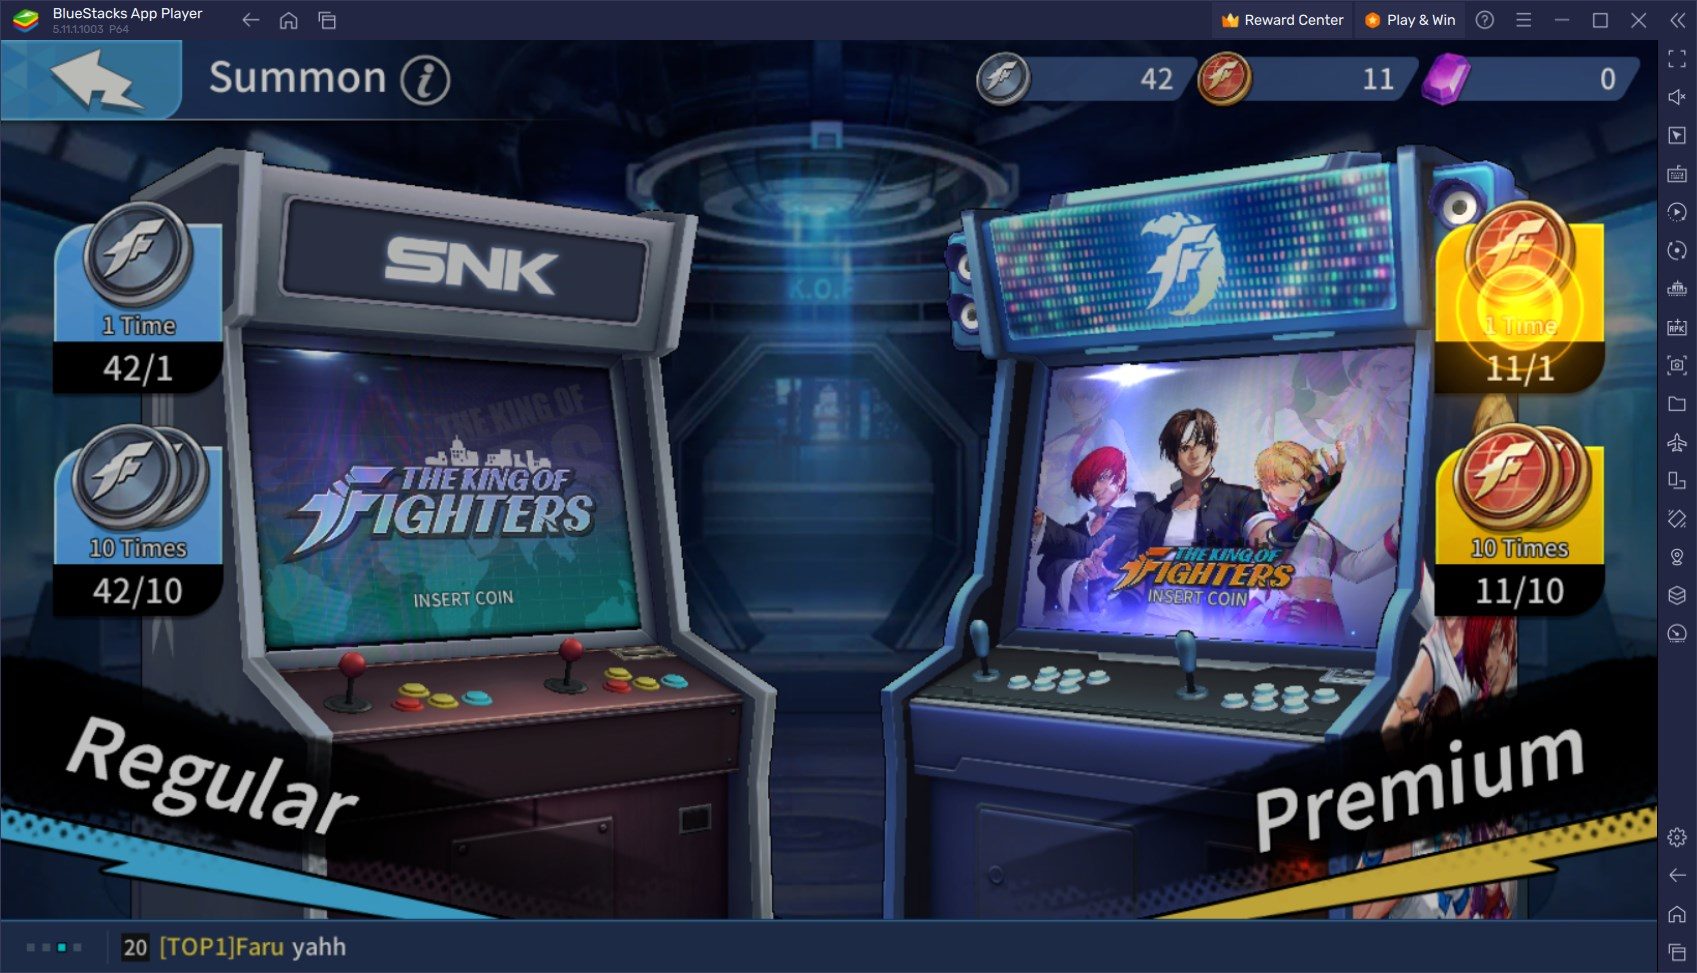 King of Fighters Survival City tactical mobile game comes out swinging